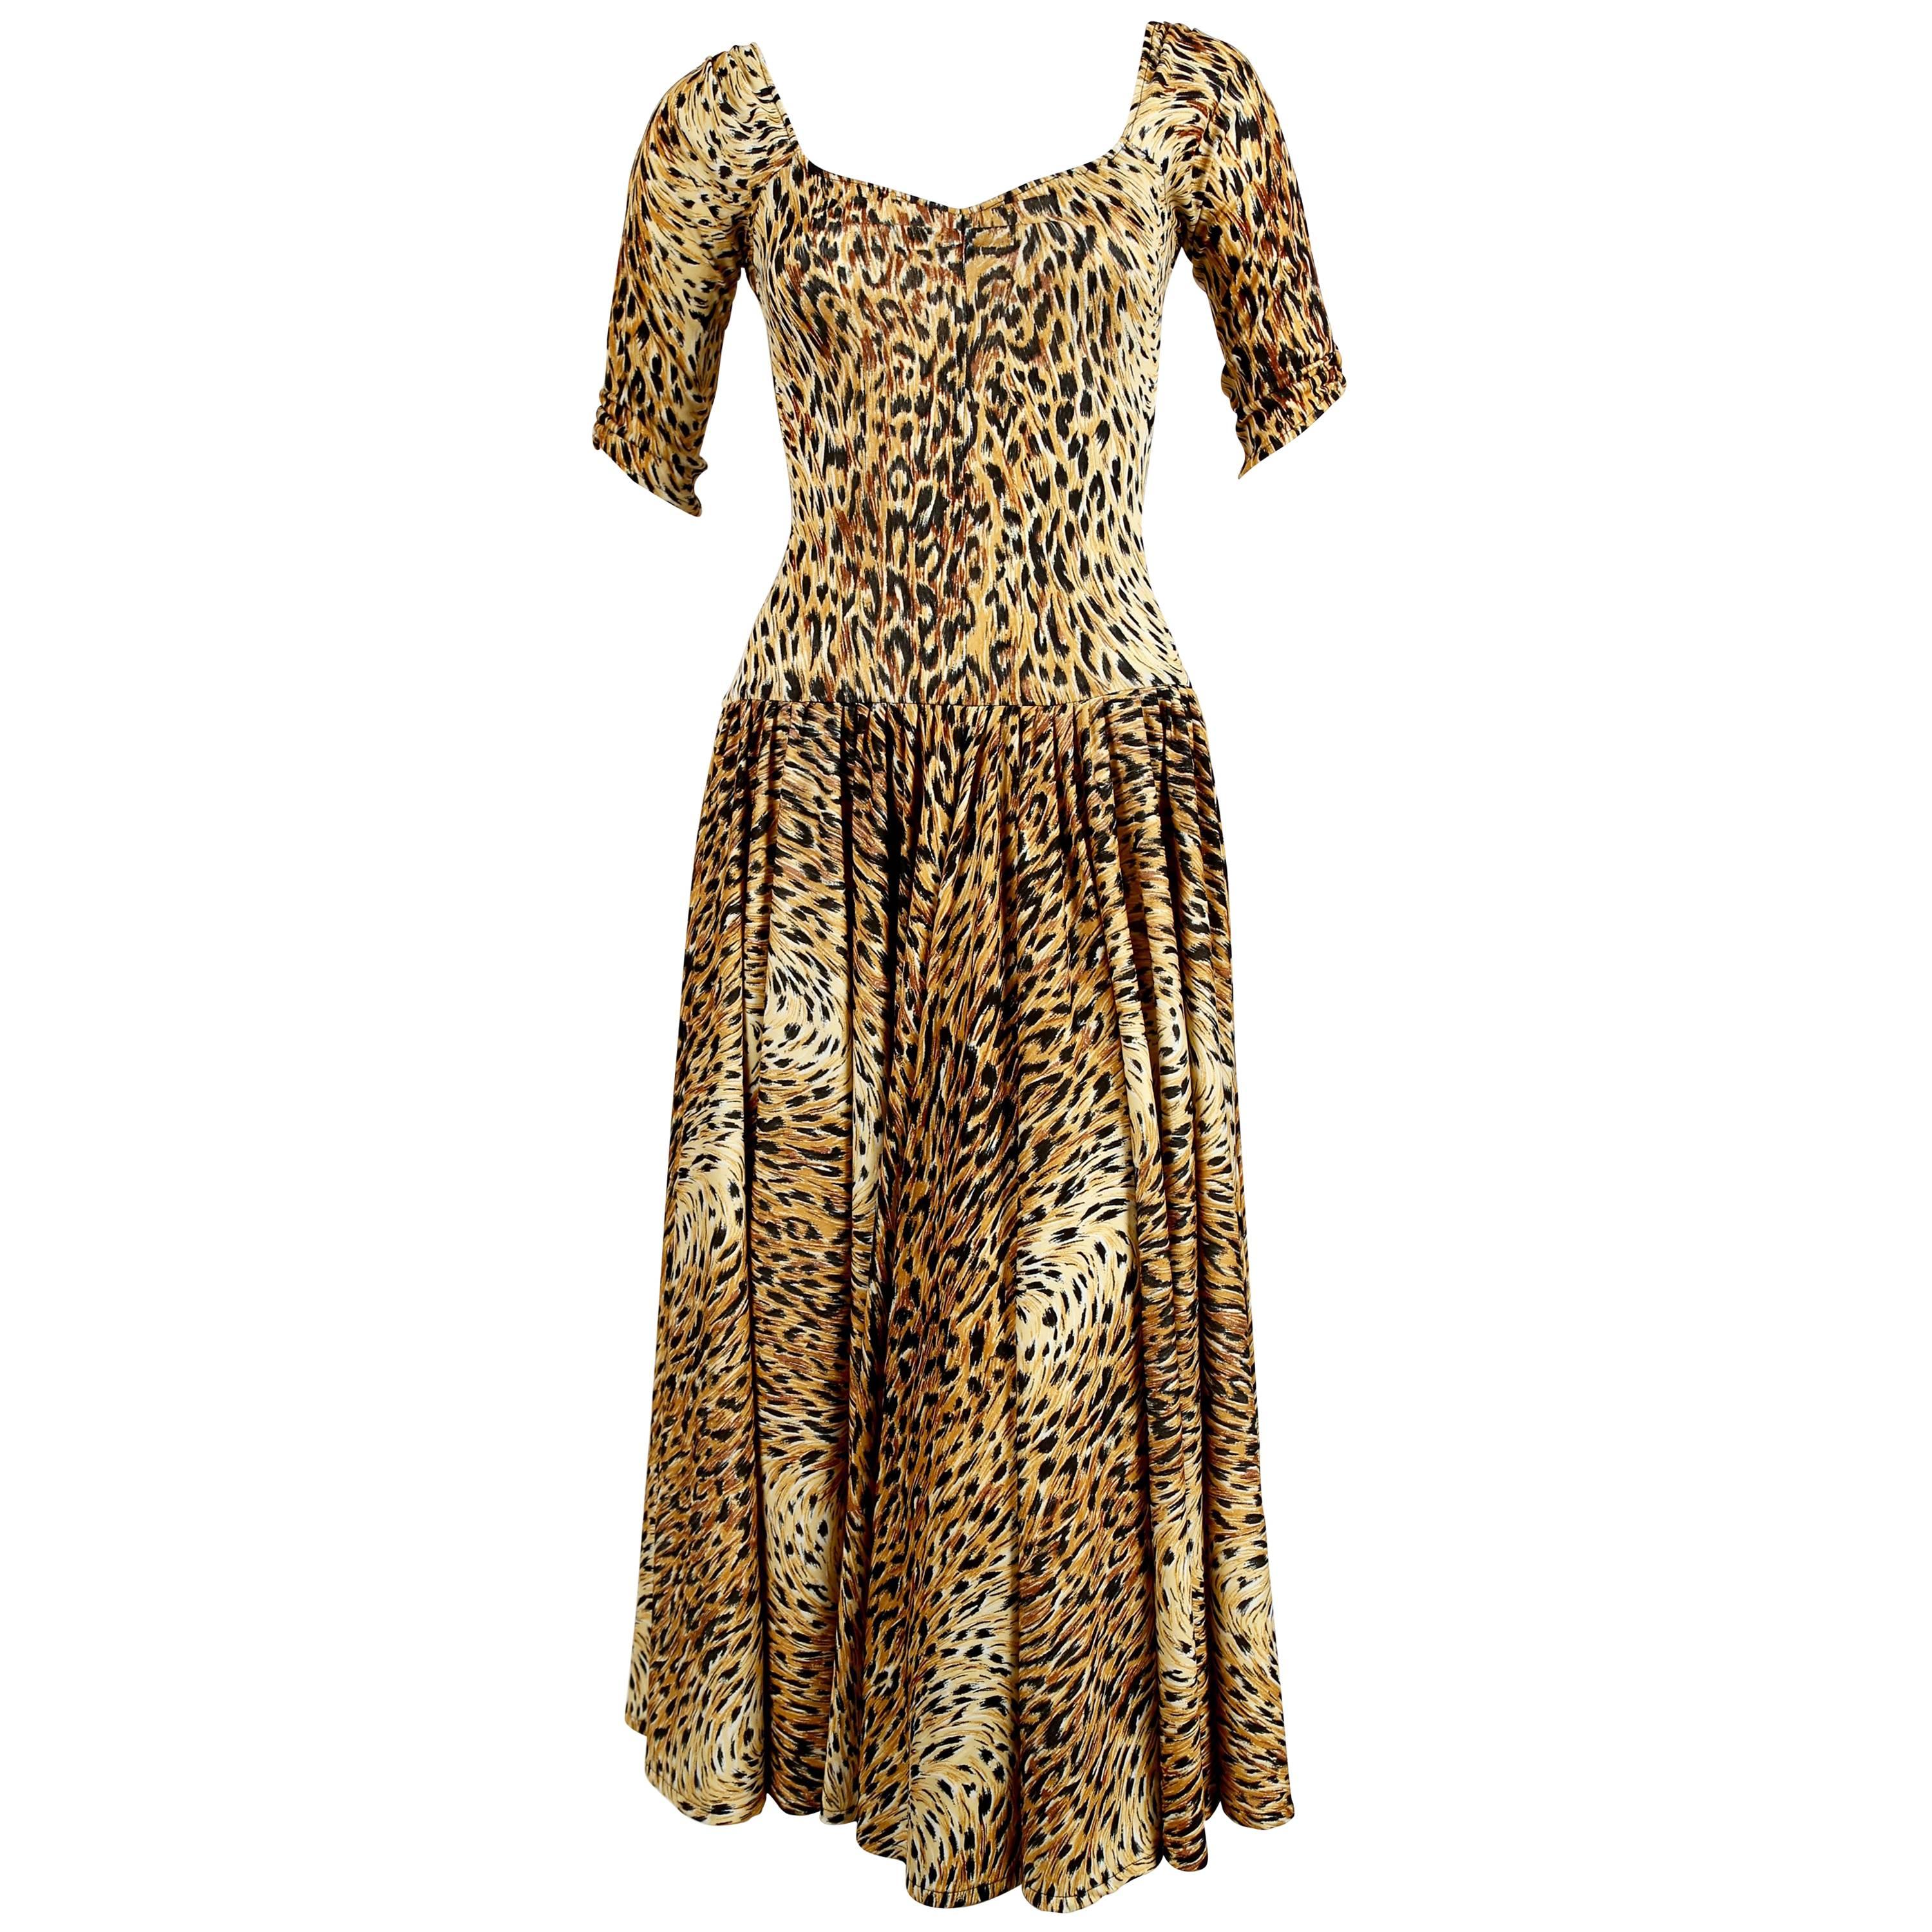 This 1970s NORMA KAMALI leopard printed jersey dress